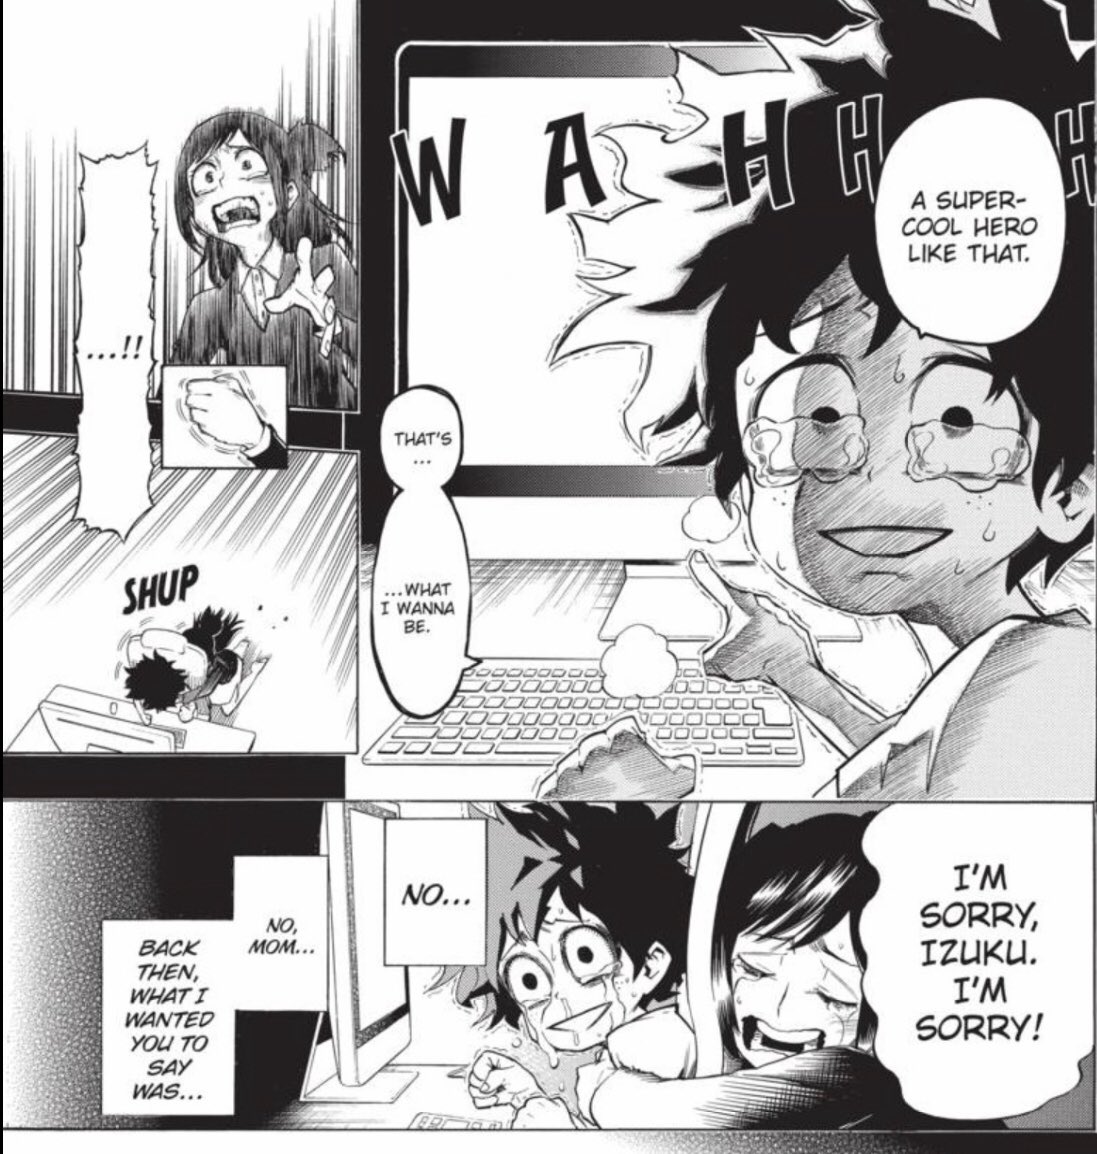 Absolutely love the parallel between young shigaraki and young izuku, just look at them as a child, they look so alike and it really just puts so much emphasis on how either one could’ve ended up like each other because of how similar they are.